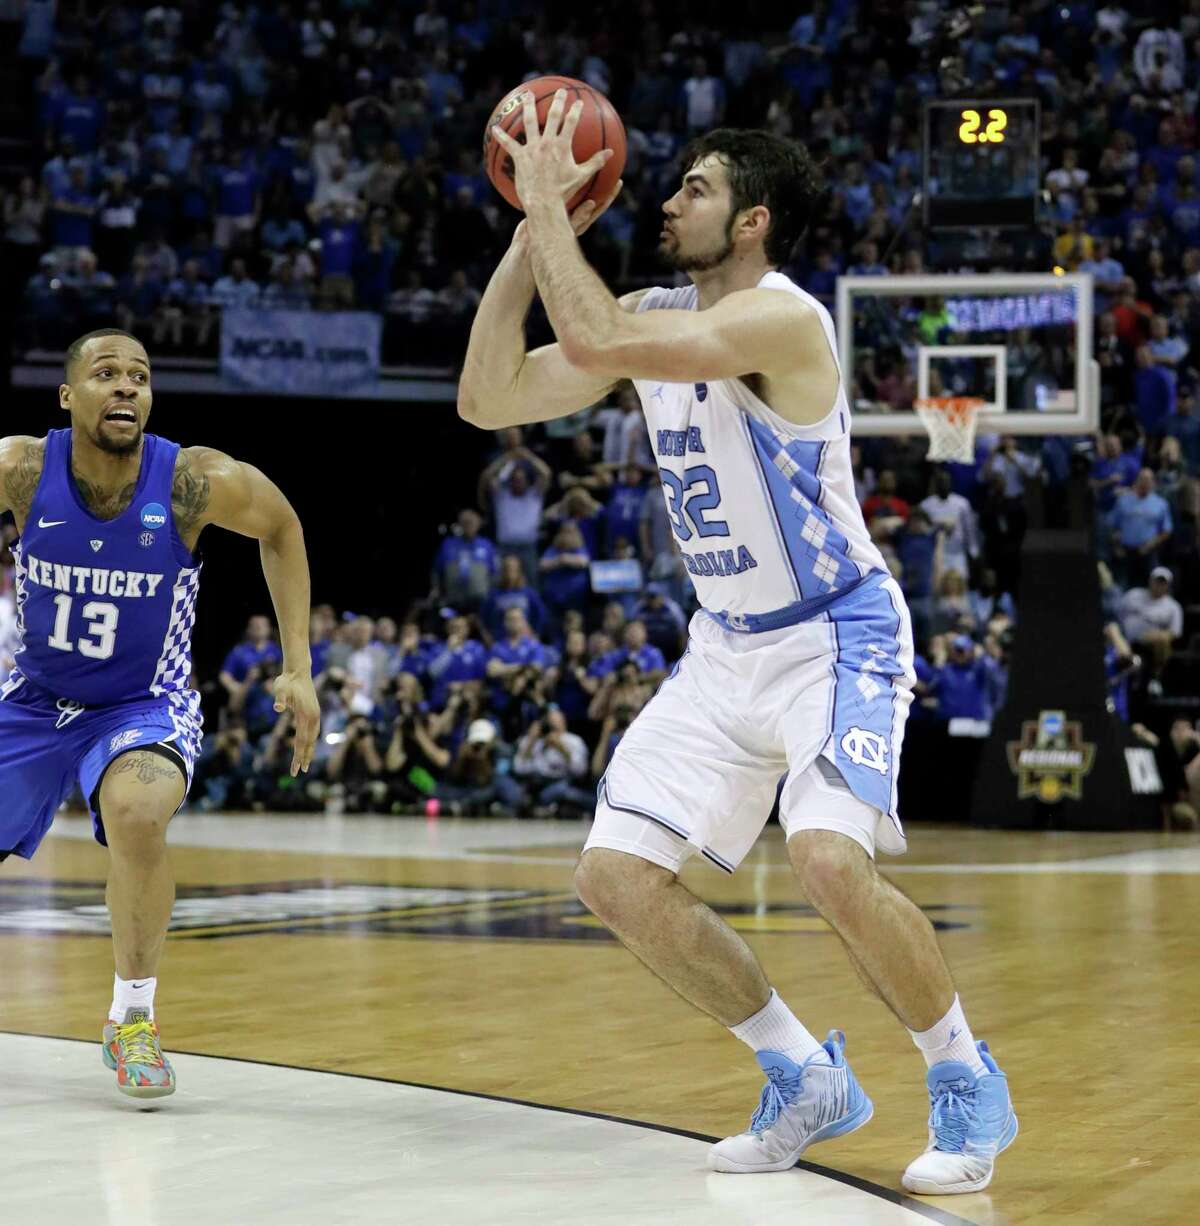 North Carolina forward Luke Maye (32) shoots the winning basket as Kentucky guard Isaiah Briscoe (13) defends in the second half of the South Regional final game in the NCAA college basketball tournament Sunday, March 26, 2017, in Memphis, Tenn. The basket gave North Carolina a 75-73 win. (AP Photo/Mark Humphrey) ORG XMIT: TNMH105